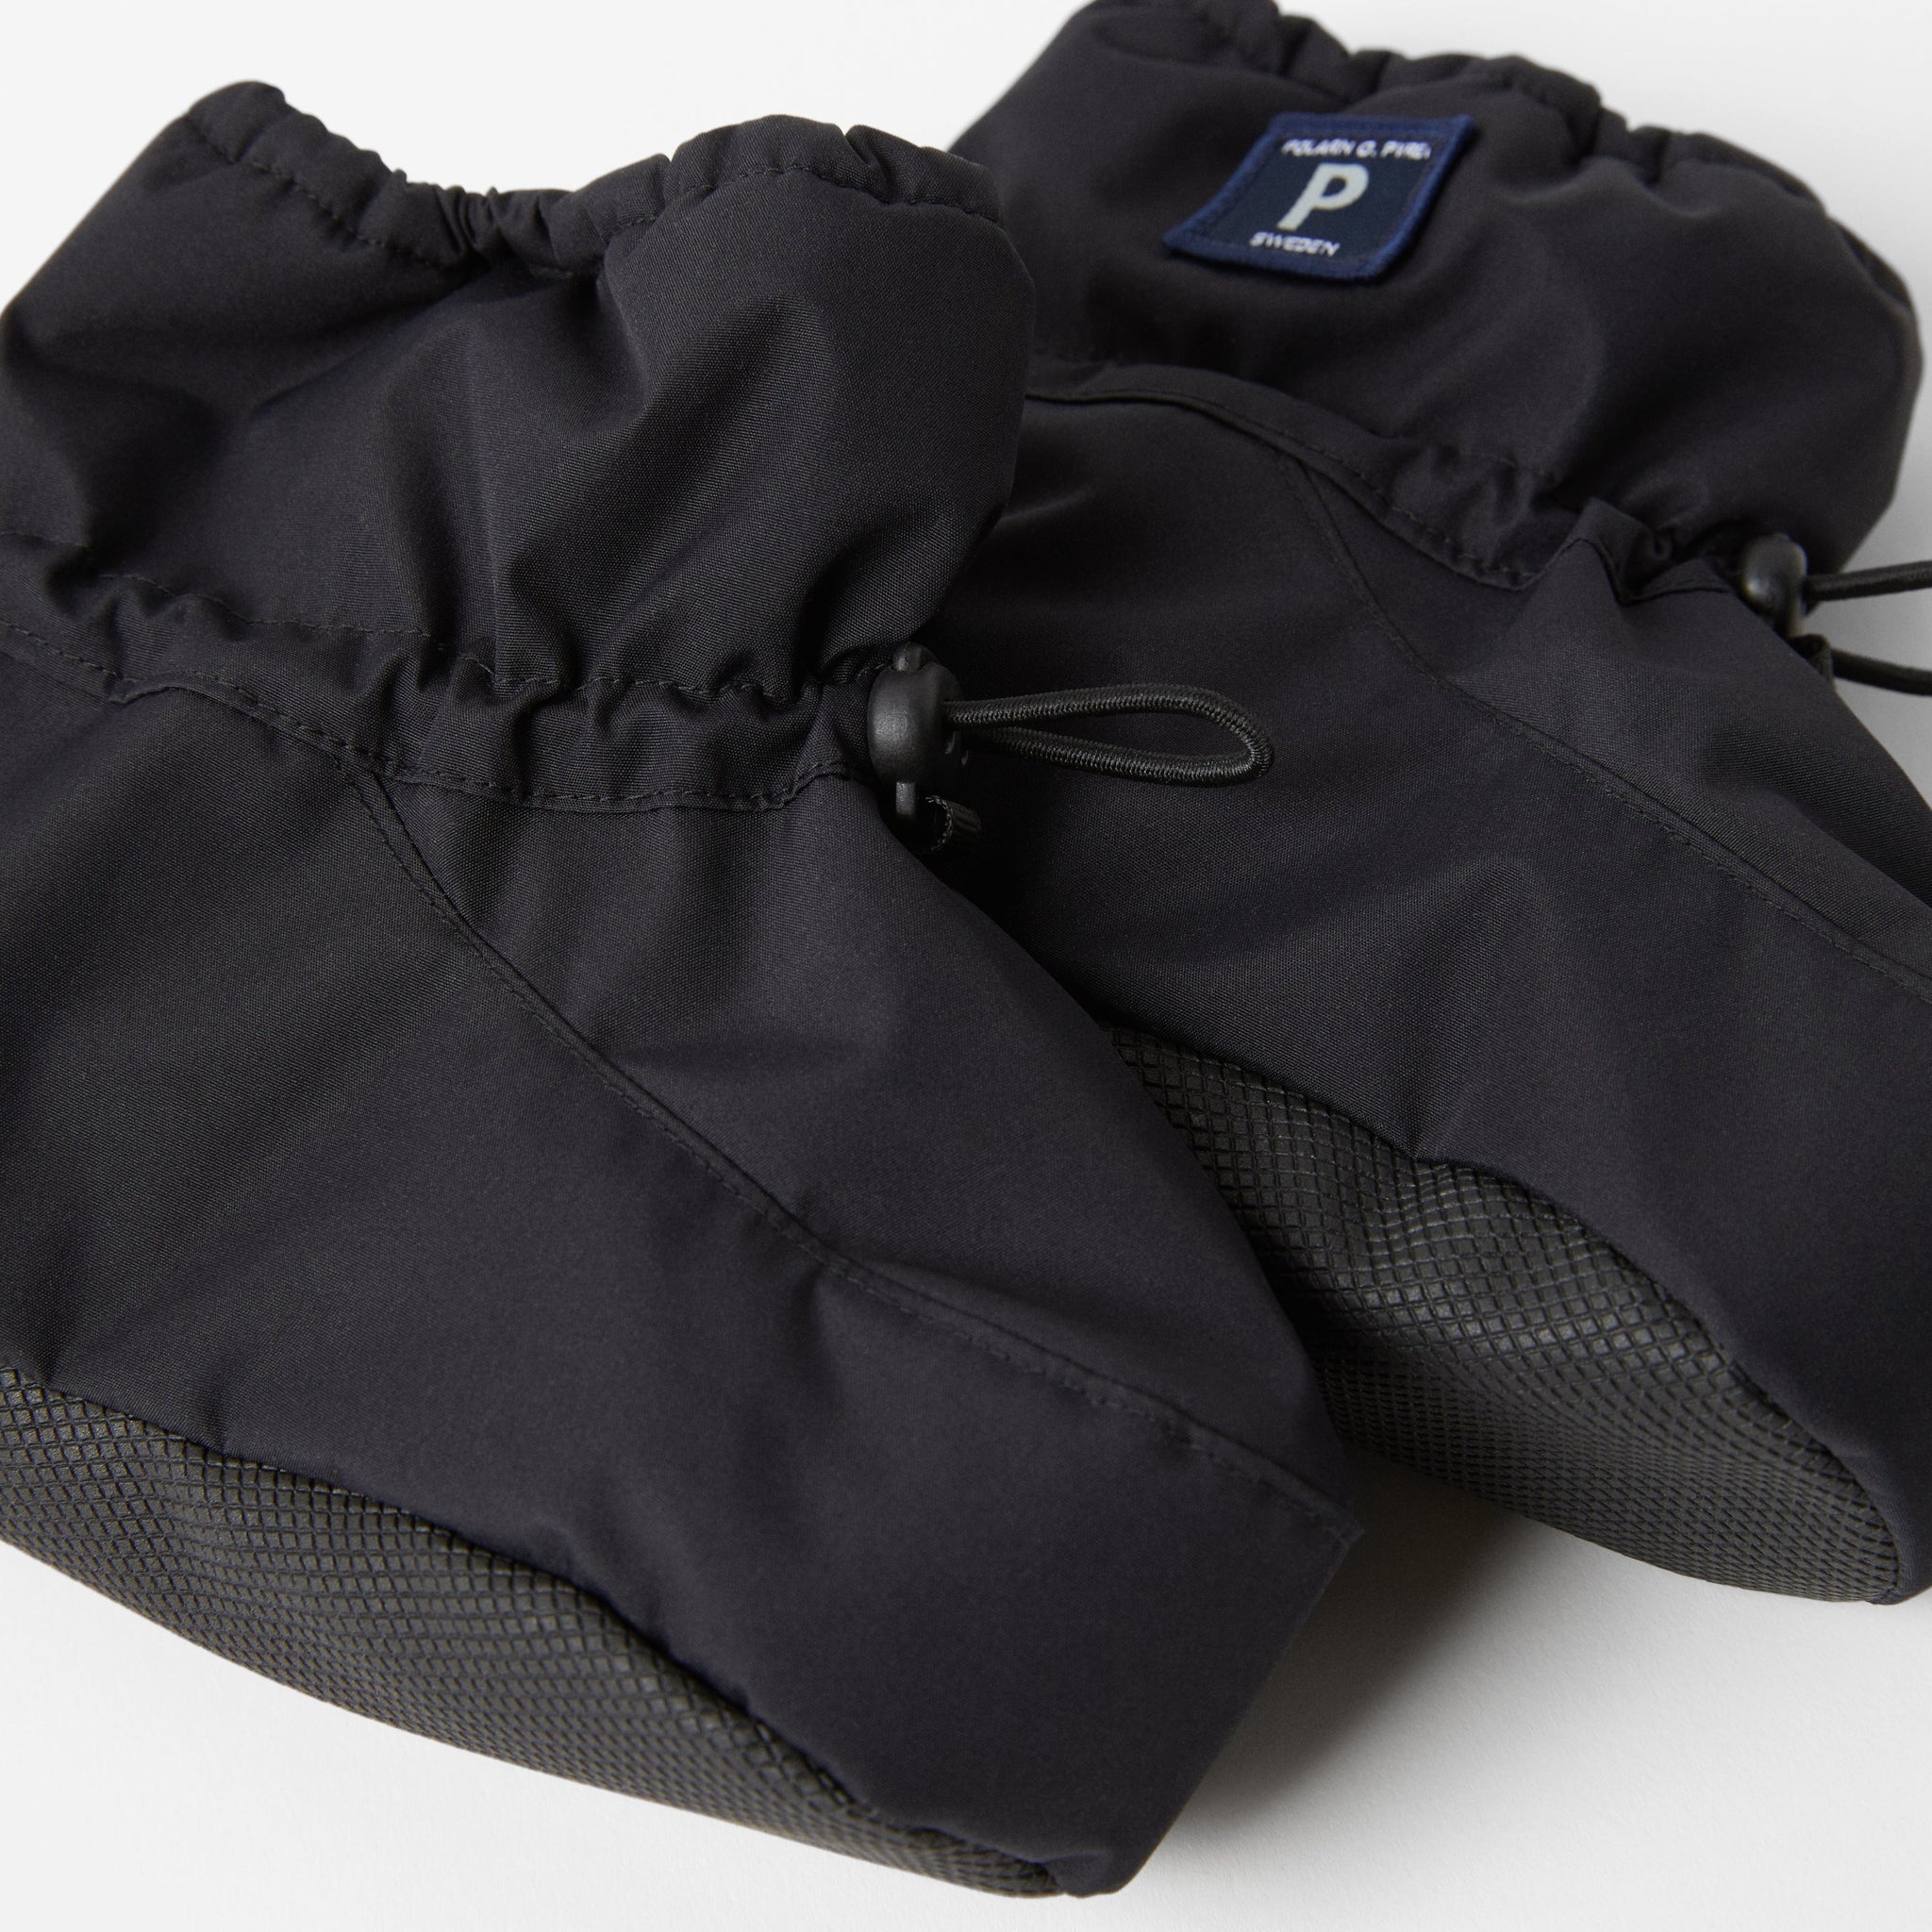 Black Padded Baby Booties from the Polarn O. Pyret kidswear collection. The best ethical kids outerwear.